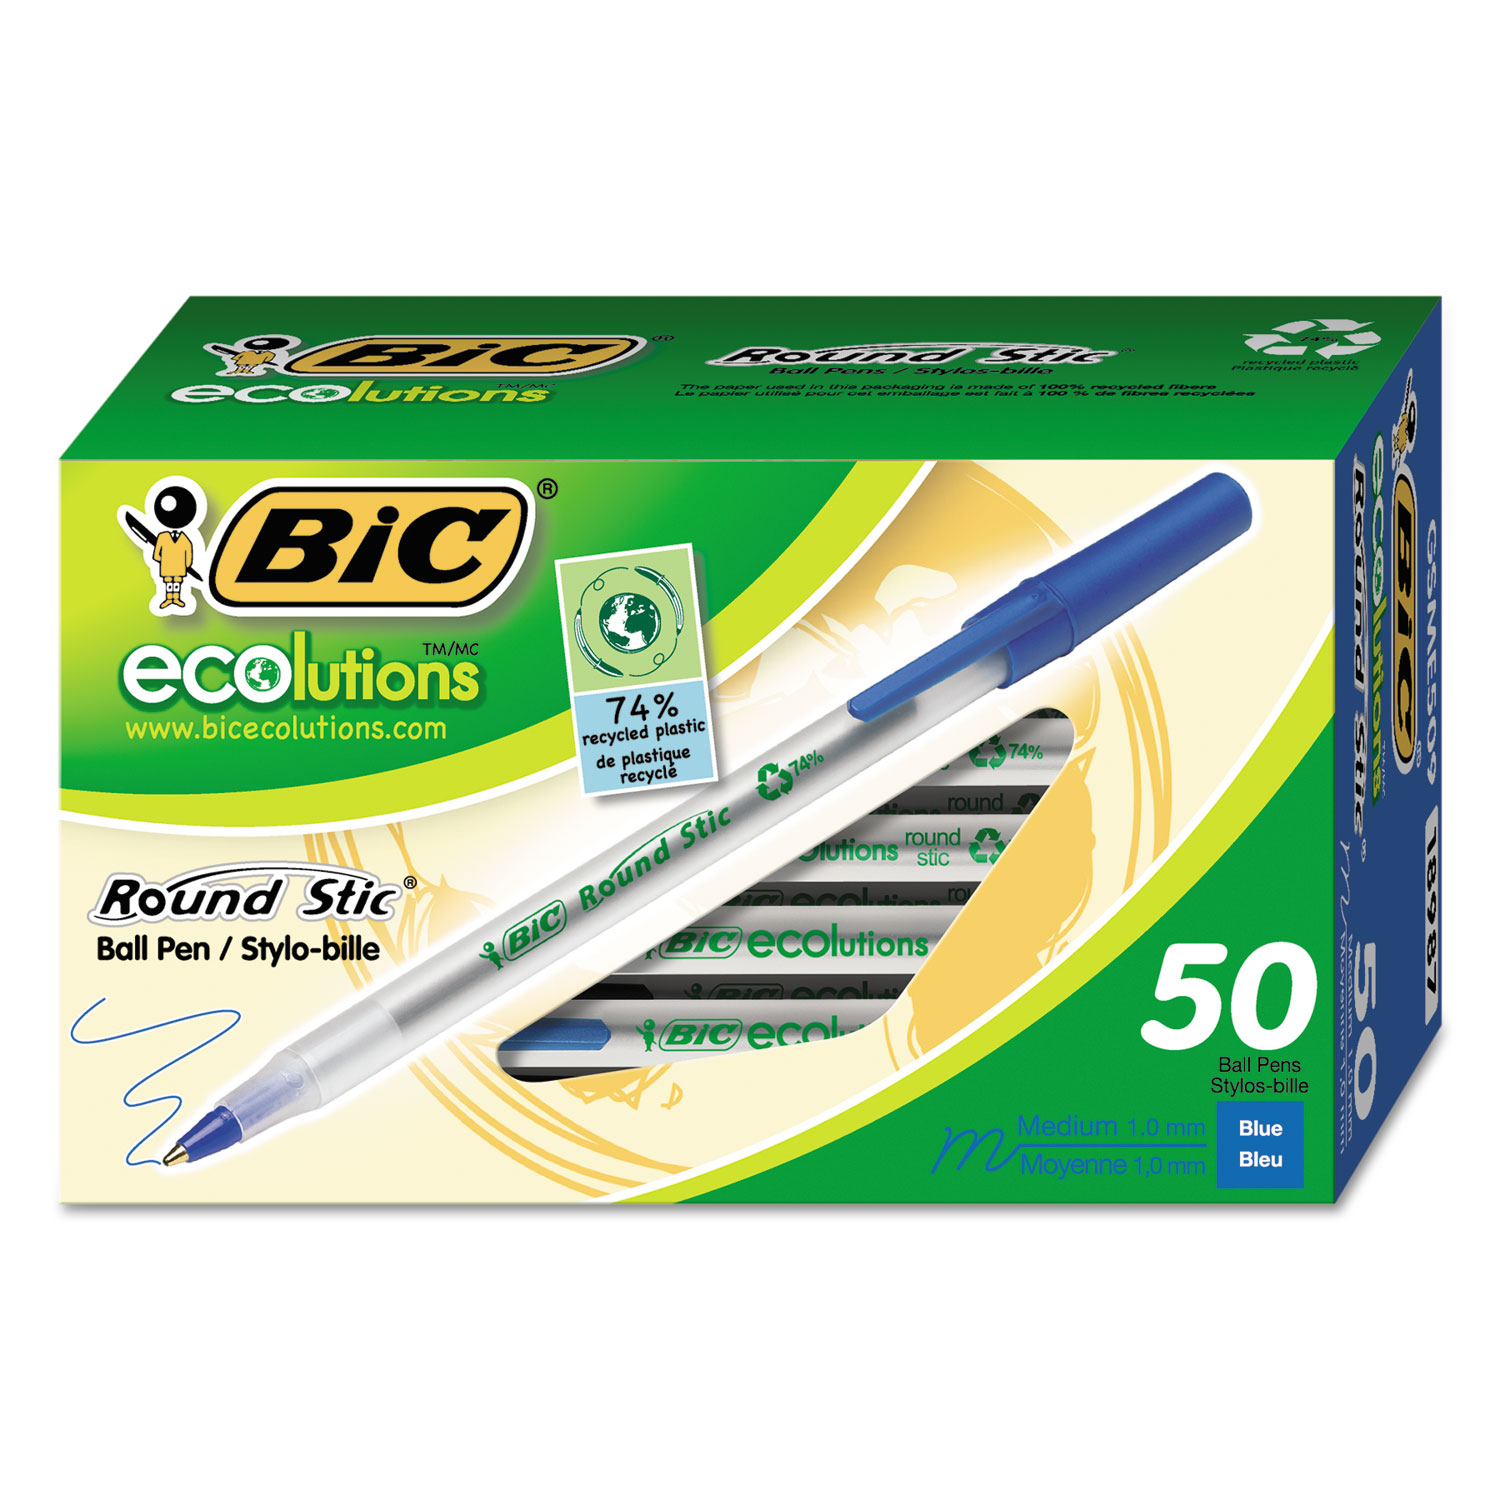  BIC GSME509BE Ecolutions Round Stic Stick Ballpoint Pen, 1mm, Blue Ink, Clear Barrel, 50/Pack (BICGSME509BE) 